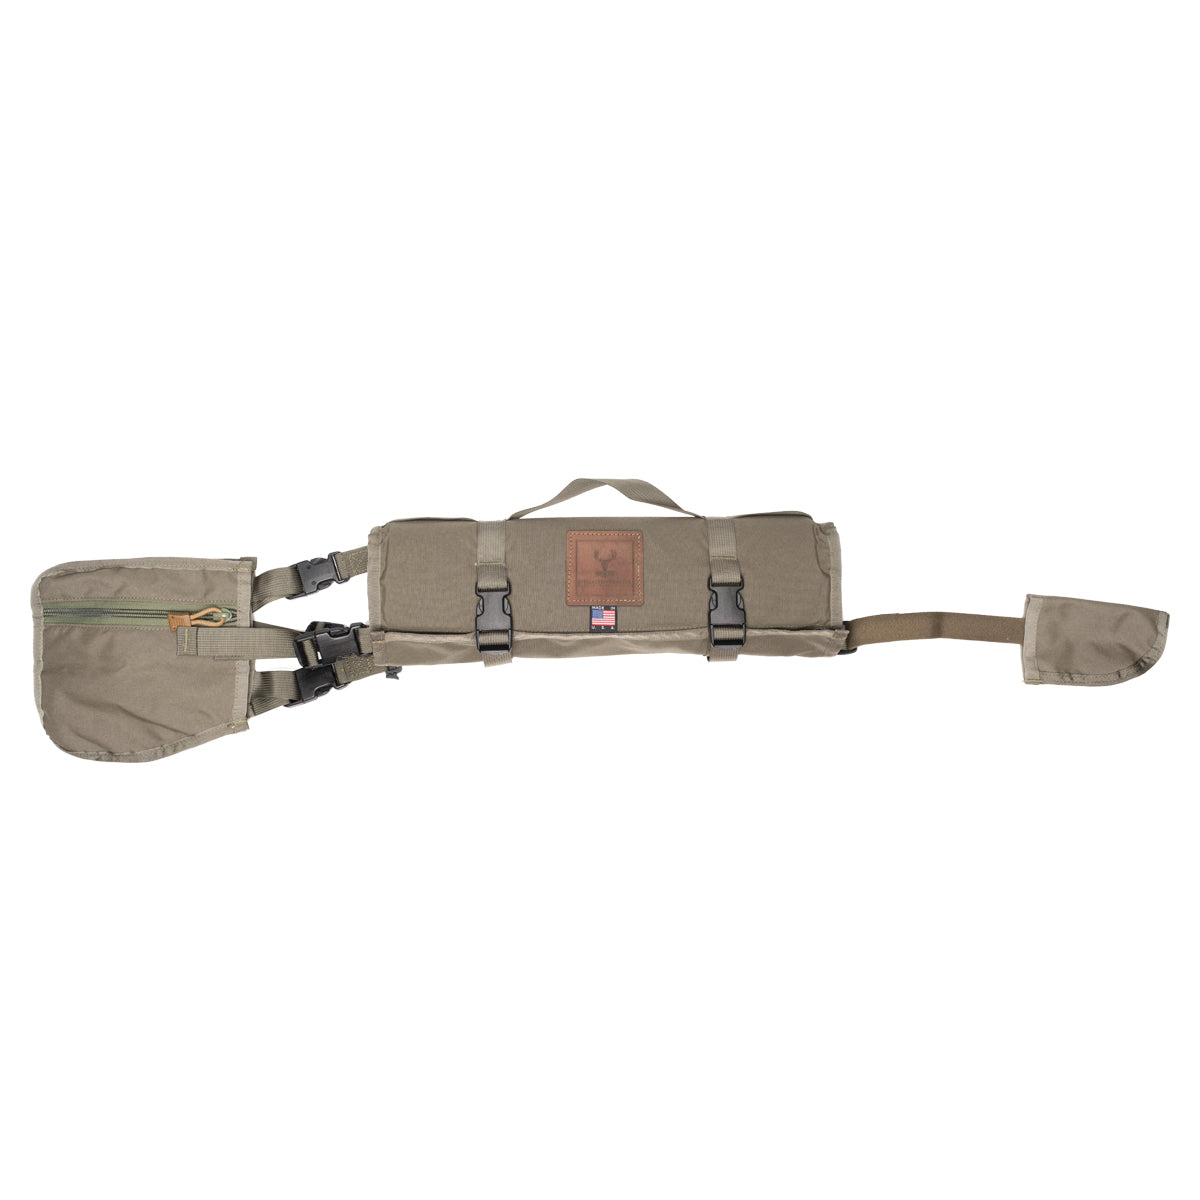 StHealthy Hunter 3-Piece Rifle Cover in  by GOHUNT | StHealthy Hunter - GOHUNT Shop